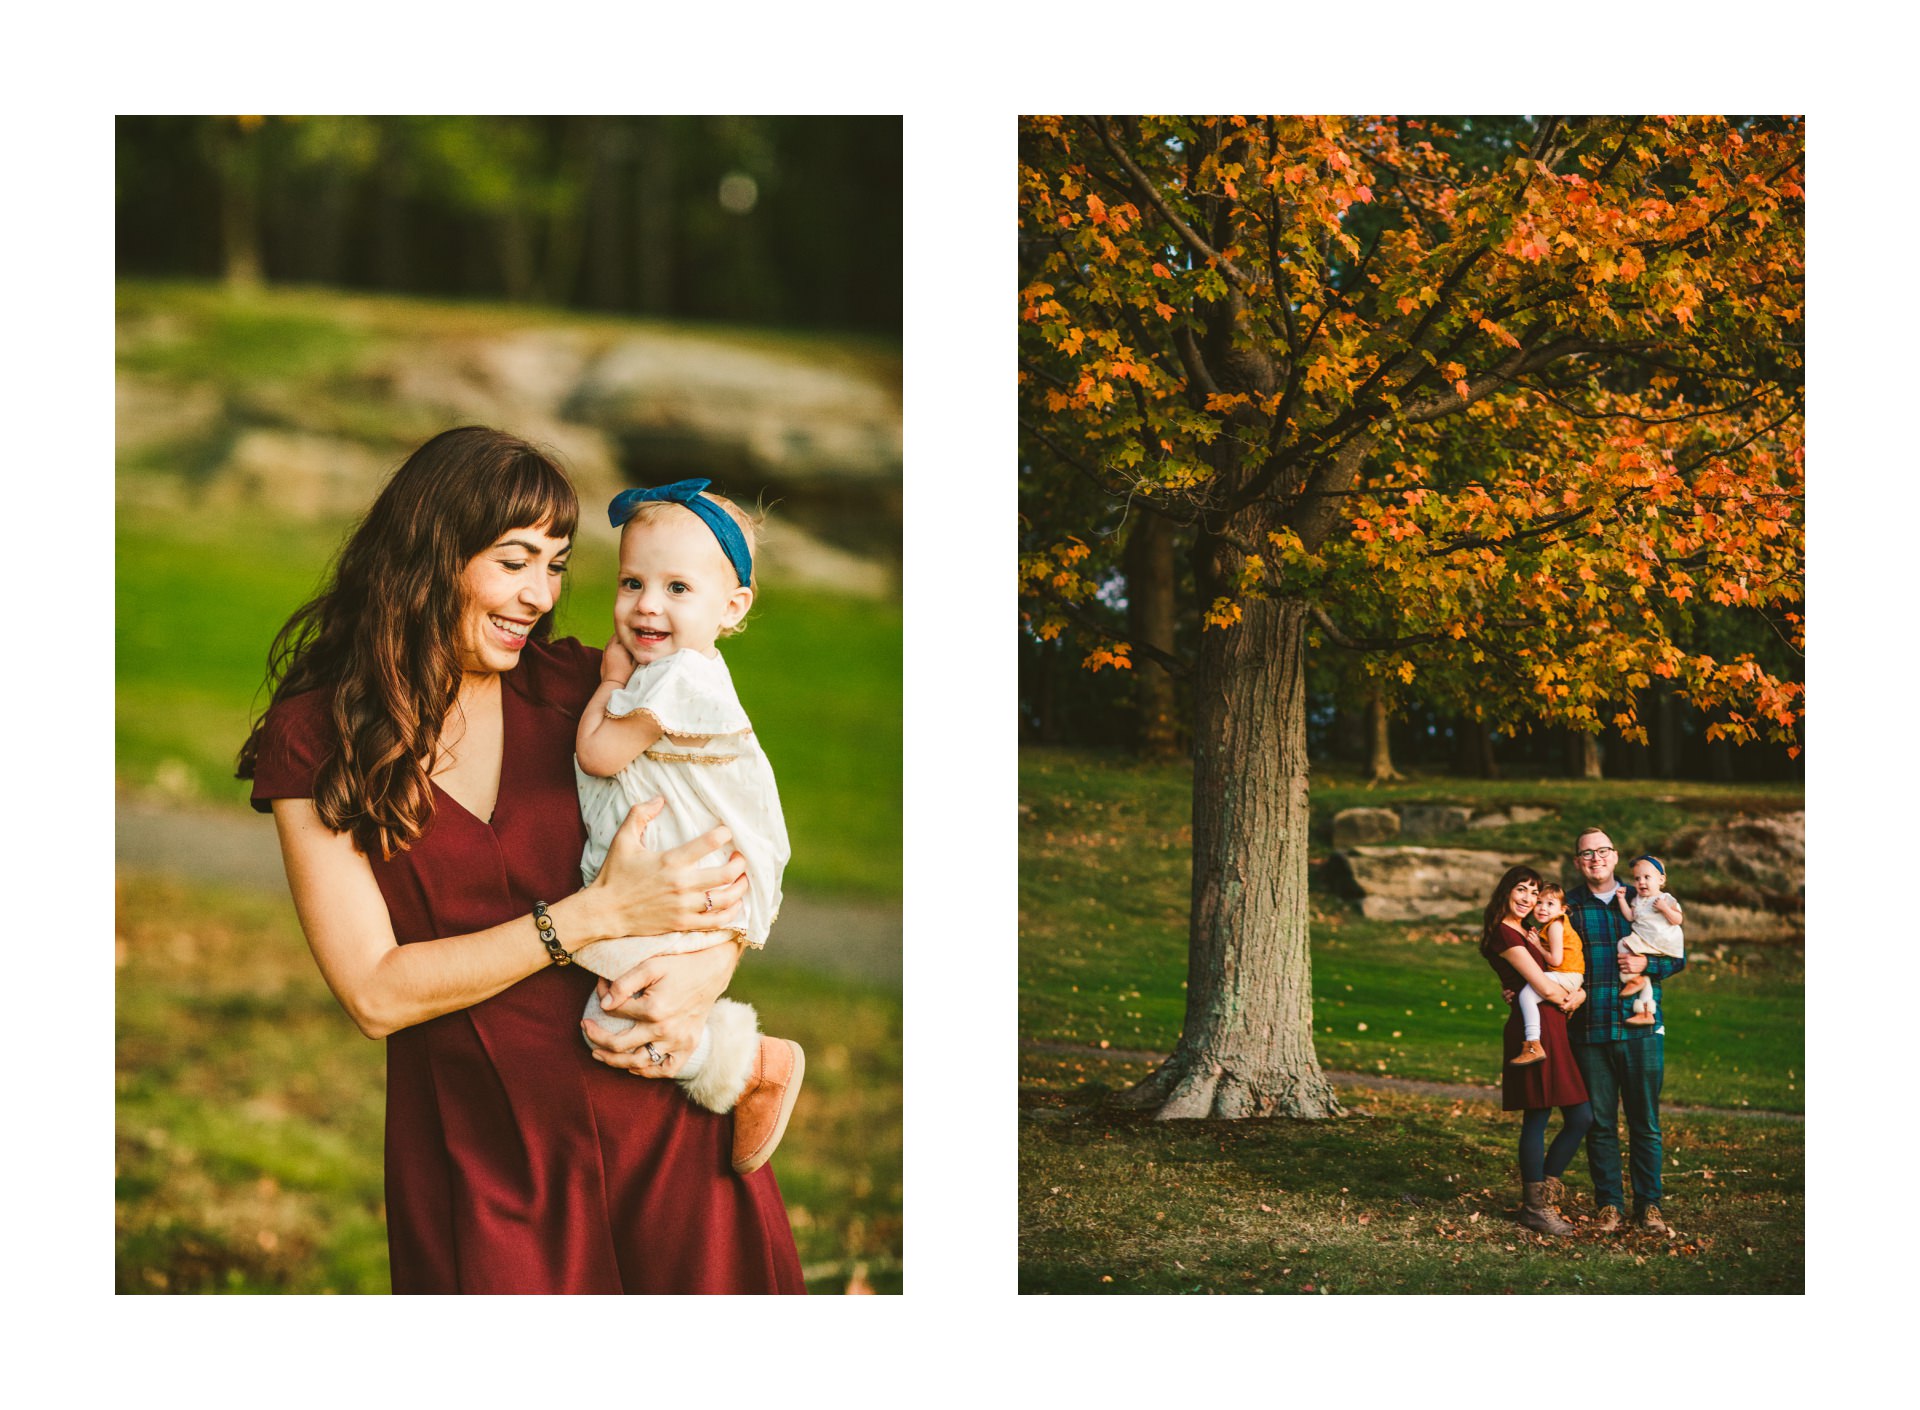 Lakewood Family Portrait Photographer Ken and Angie Clunk 18.jpg